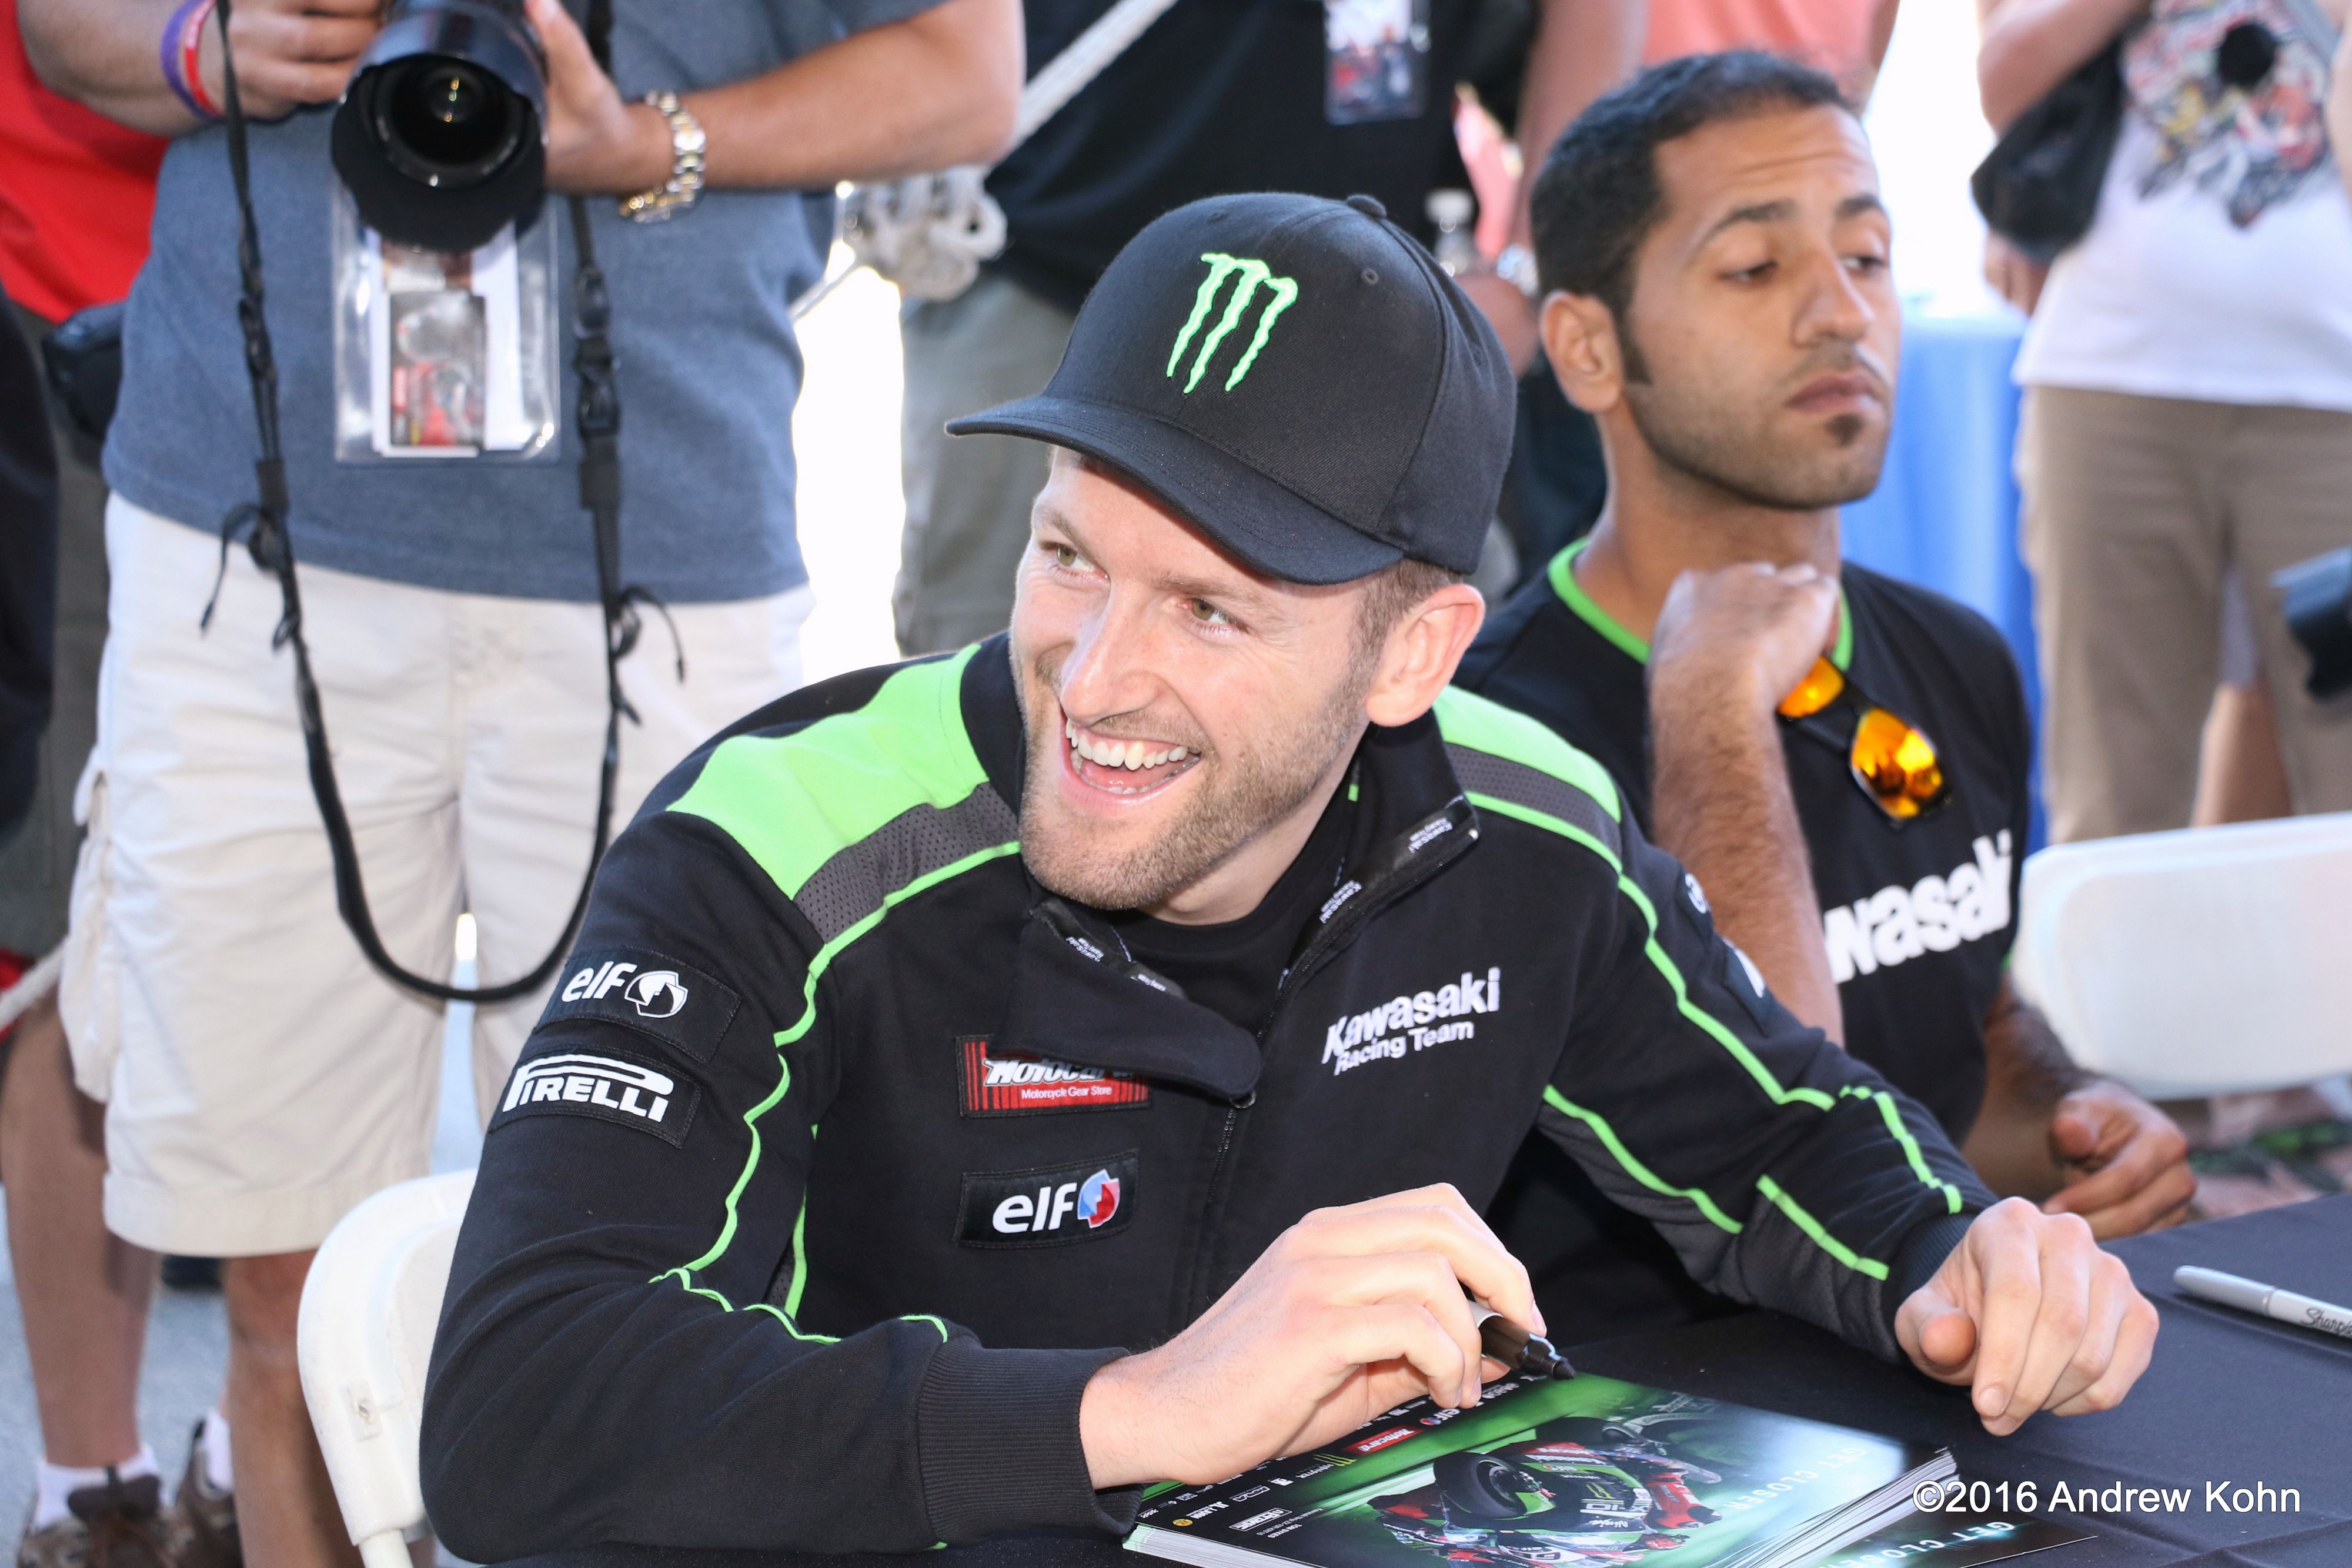 Tom Sykes signs autographs